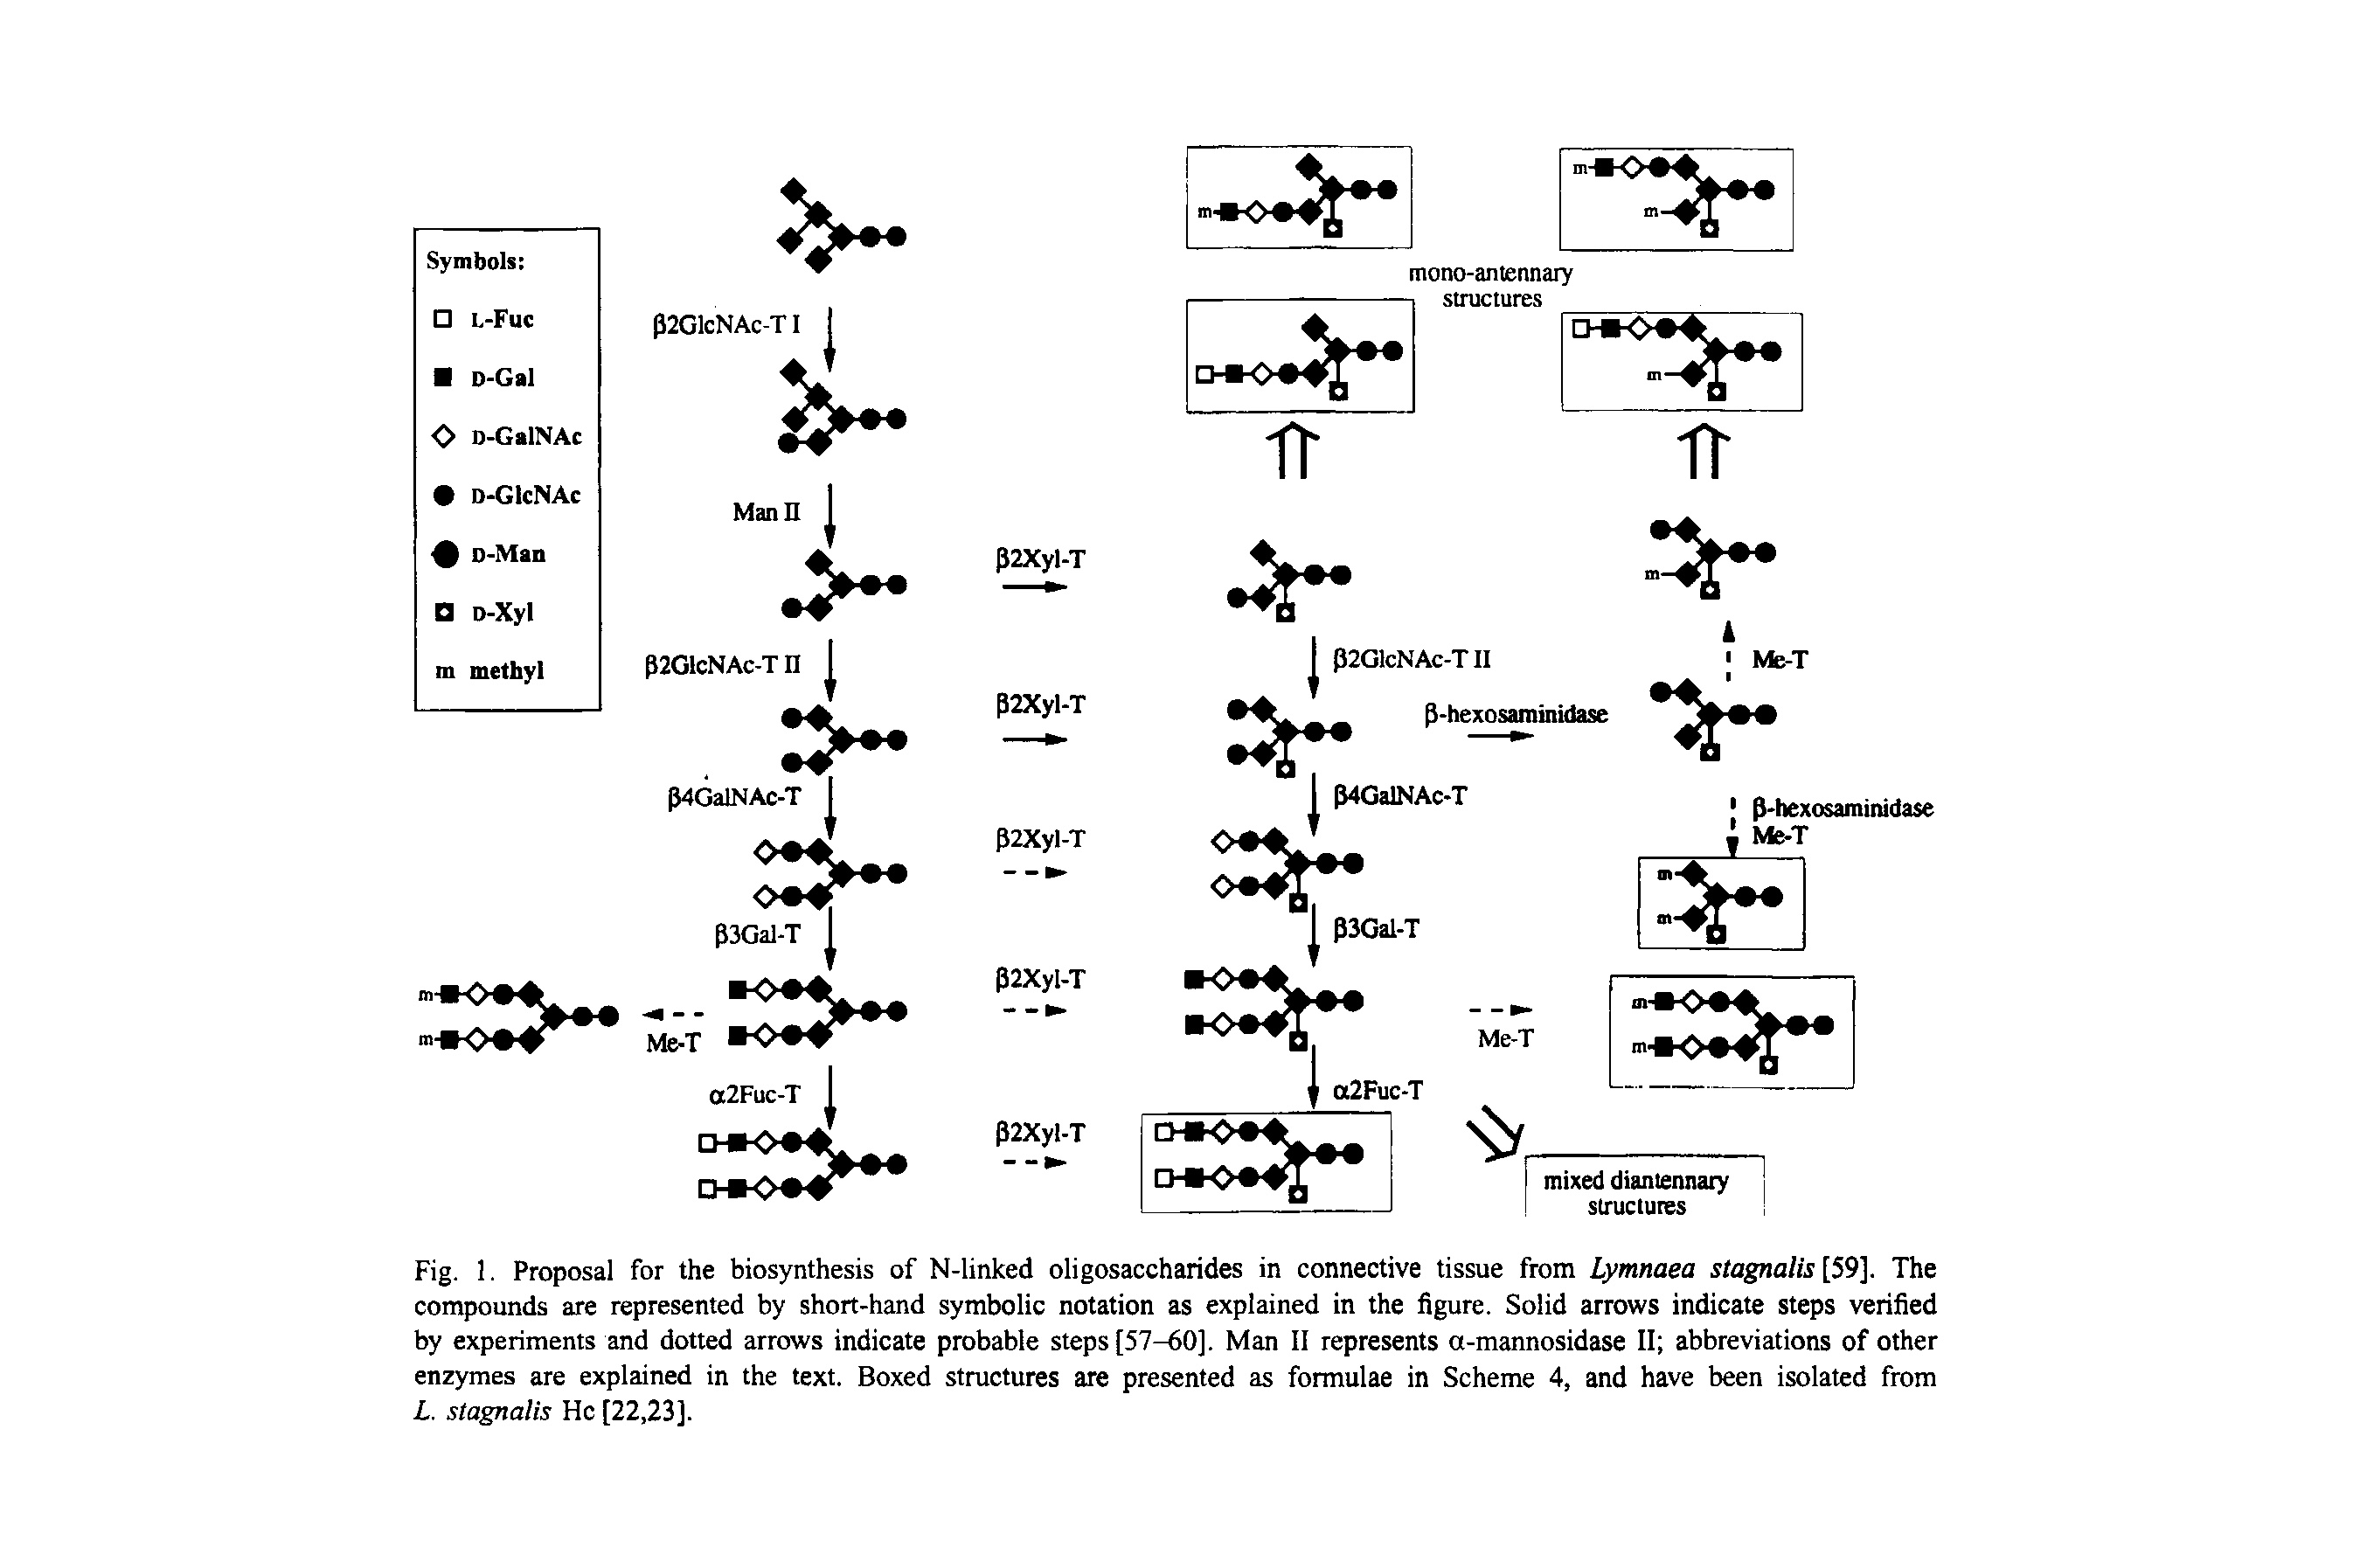 Fig. 1. Proposal for the biosynthesis of N-linked oligosaccharides in connective tissue from Lymnaea stagnalis [59]. The compounds are represented by short-hand symbolic notation as explained in the figure. Solid arrows indicate steps verified by experiments and dotted arrows indicate probable steps [57-60]. Man II represents a-mannosidase II abbreviations of other enzymes are explained in the text. Boxed structures are presented as formulae in Scheme 4, and have been isolated from L. stagnalis He [22,23].